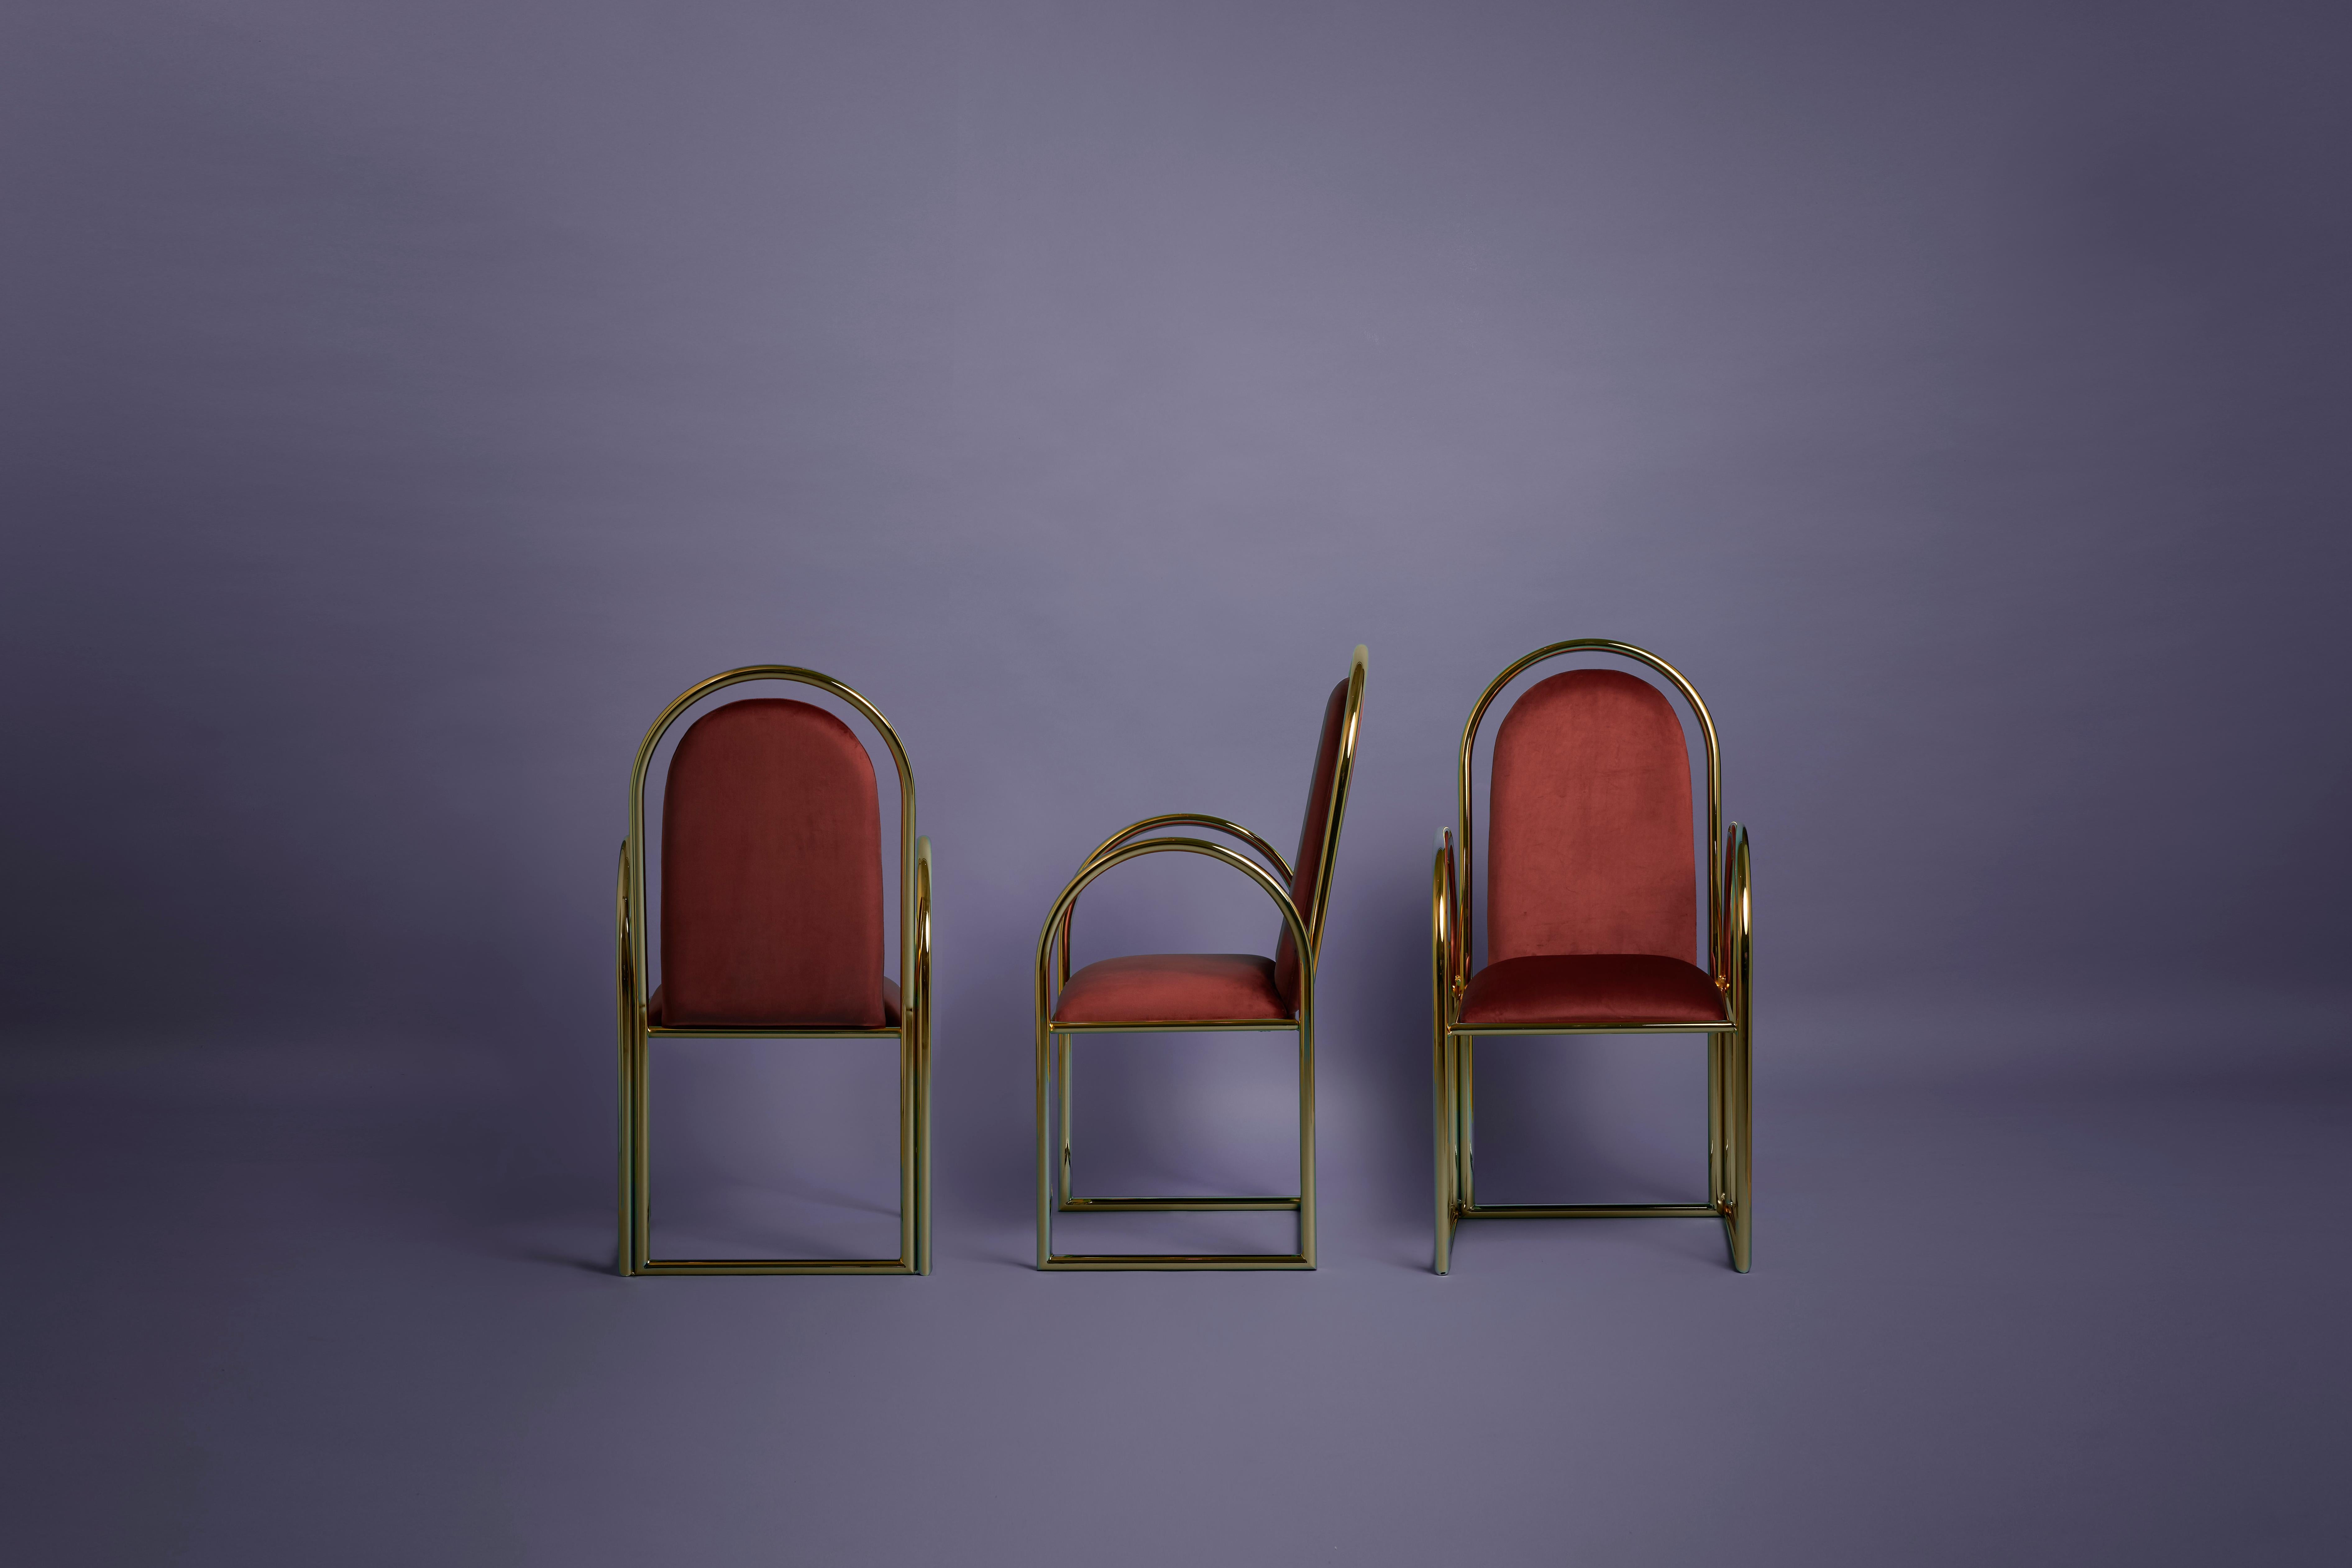 Set of 3 Arco chair by Houtique
Materials: Metallic structure bathed in 24 Ct gold // epoxy paint
 Upholstery velvet
Dimensions: 47 x 45 x H 100 cm
 Seat height: 46 cm

Chairs, tables and stools with fun shapes inspired in the